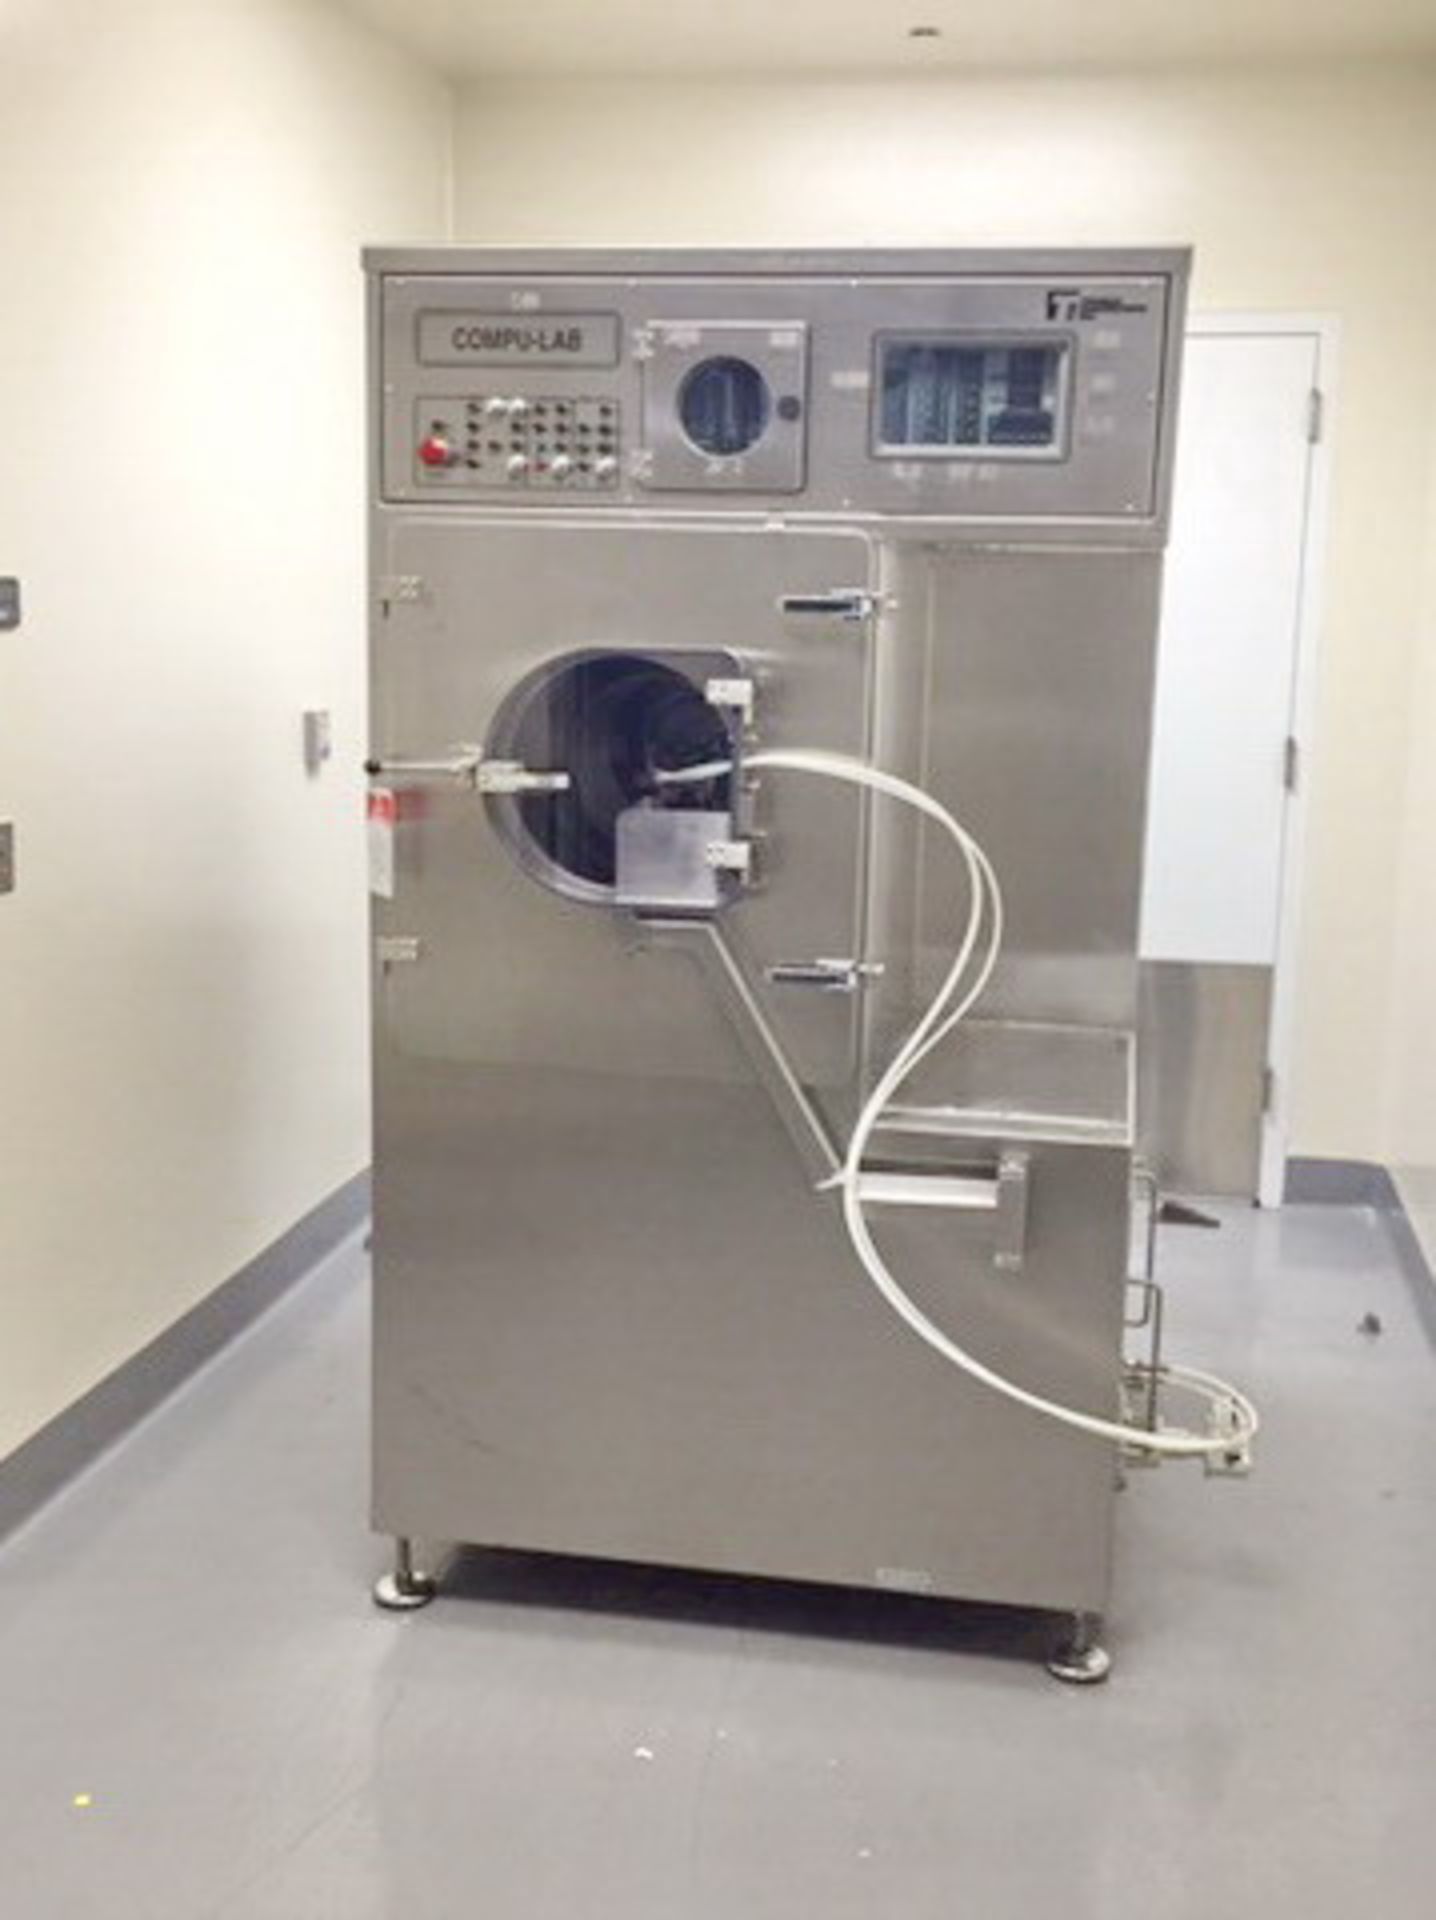 Thomas XR Perforate Interchangeable Pan Coating System rated for solvents, Model Compulab 24 - Image 3 of 23